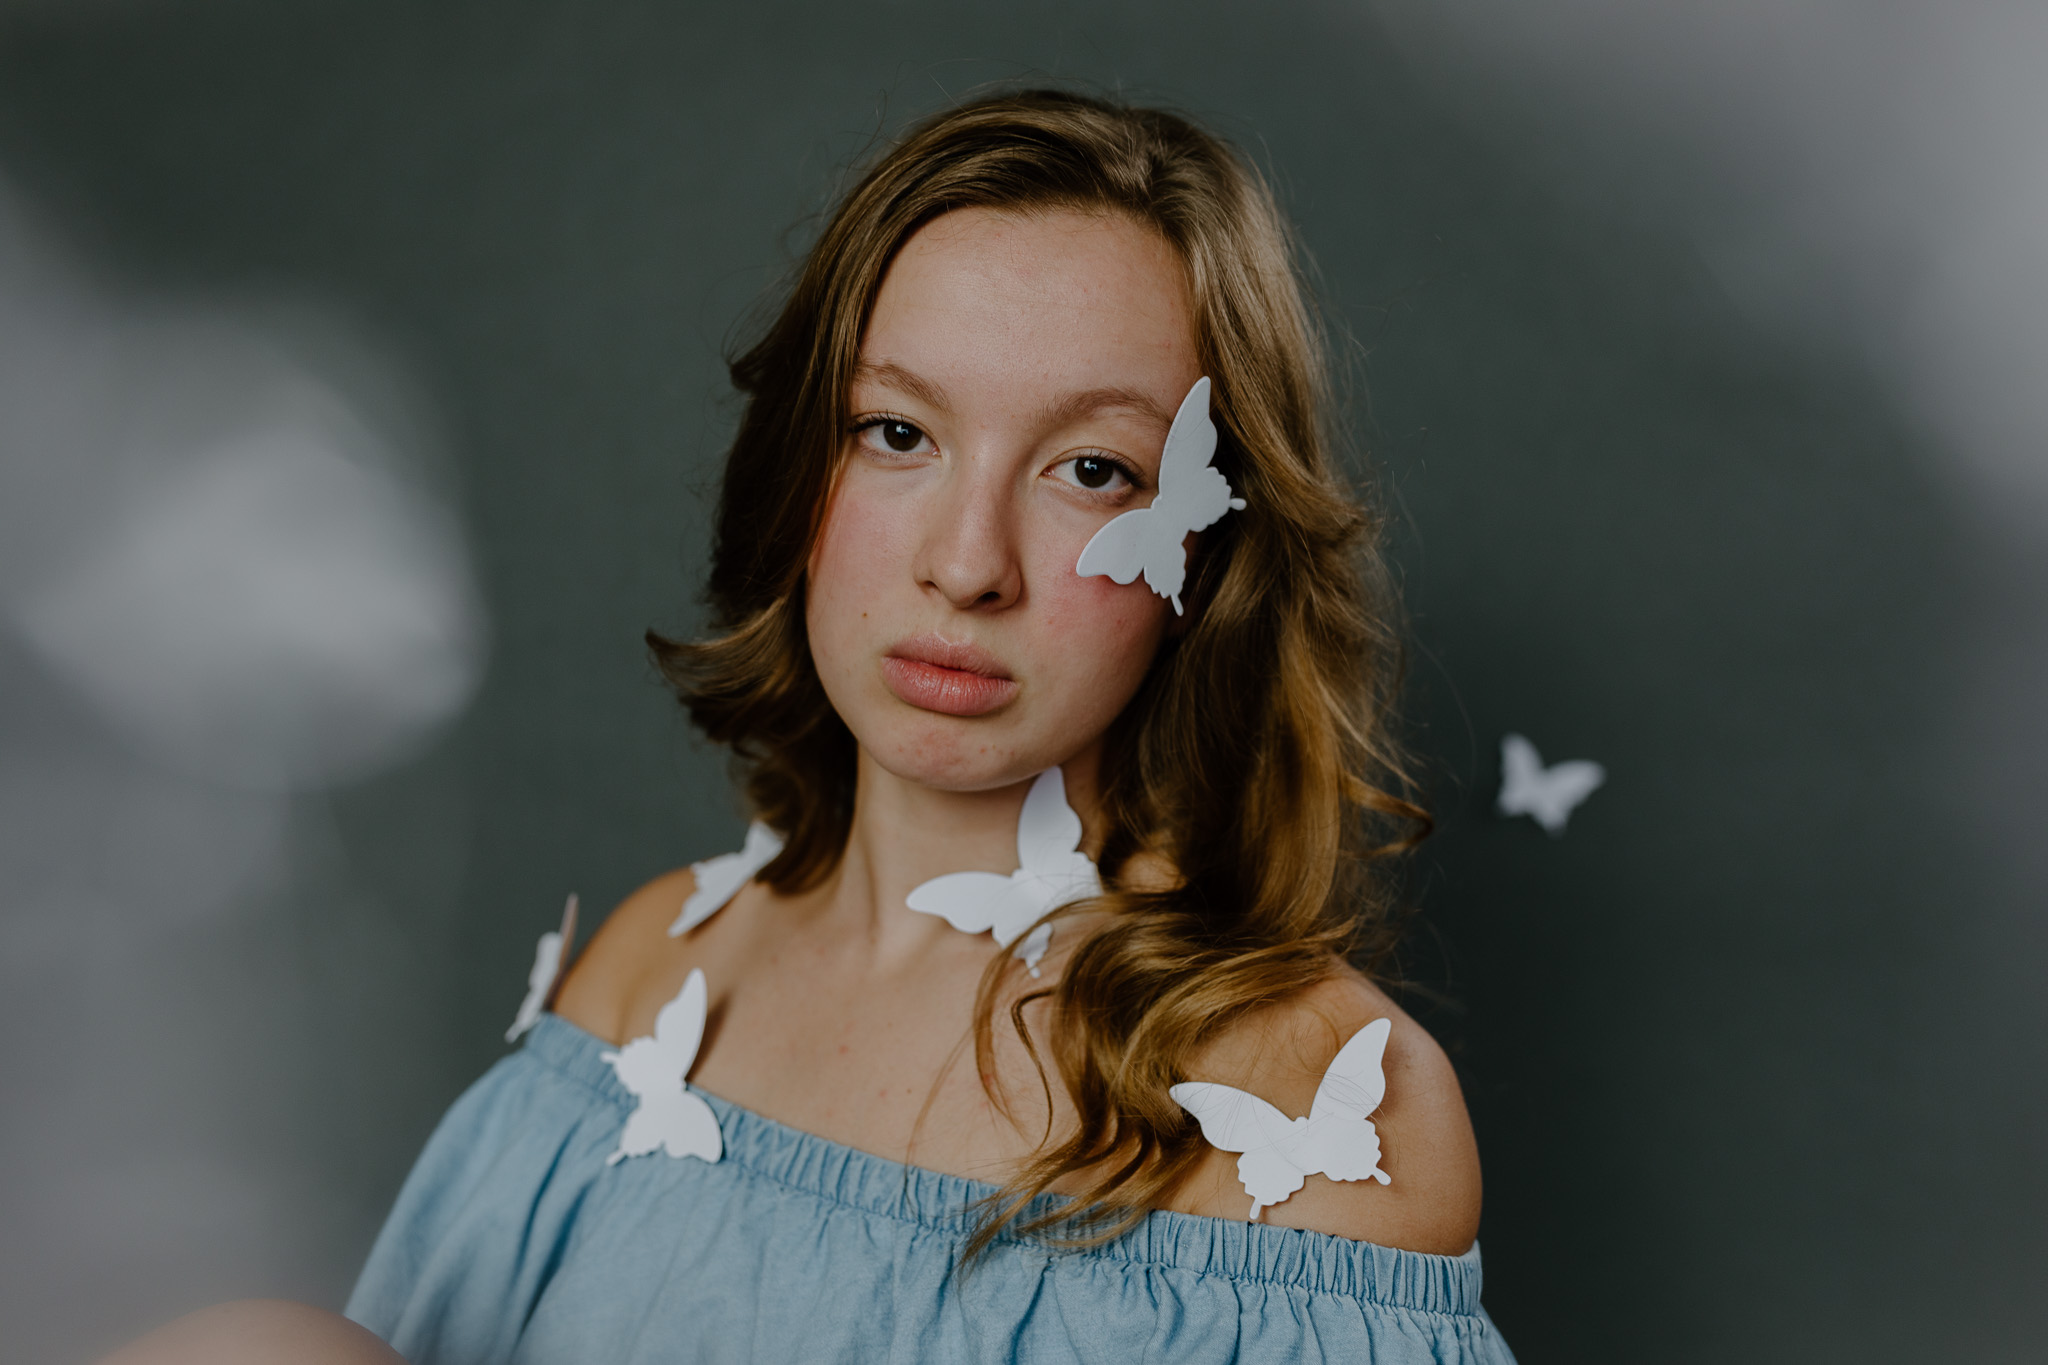 girl looking directly at camera covered in white butterflies